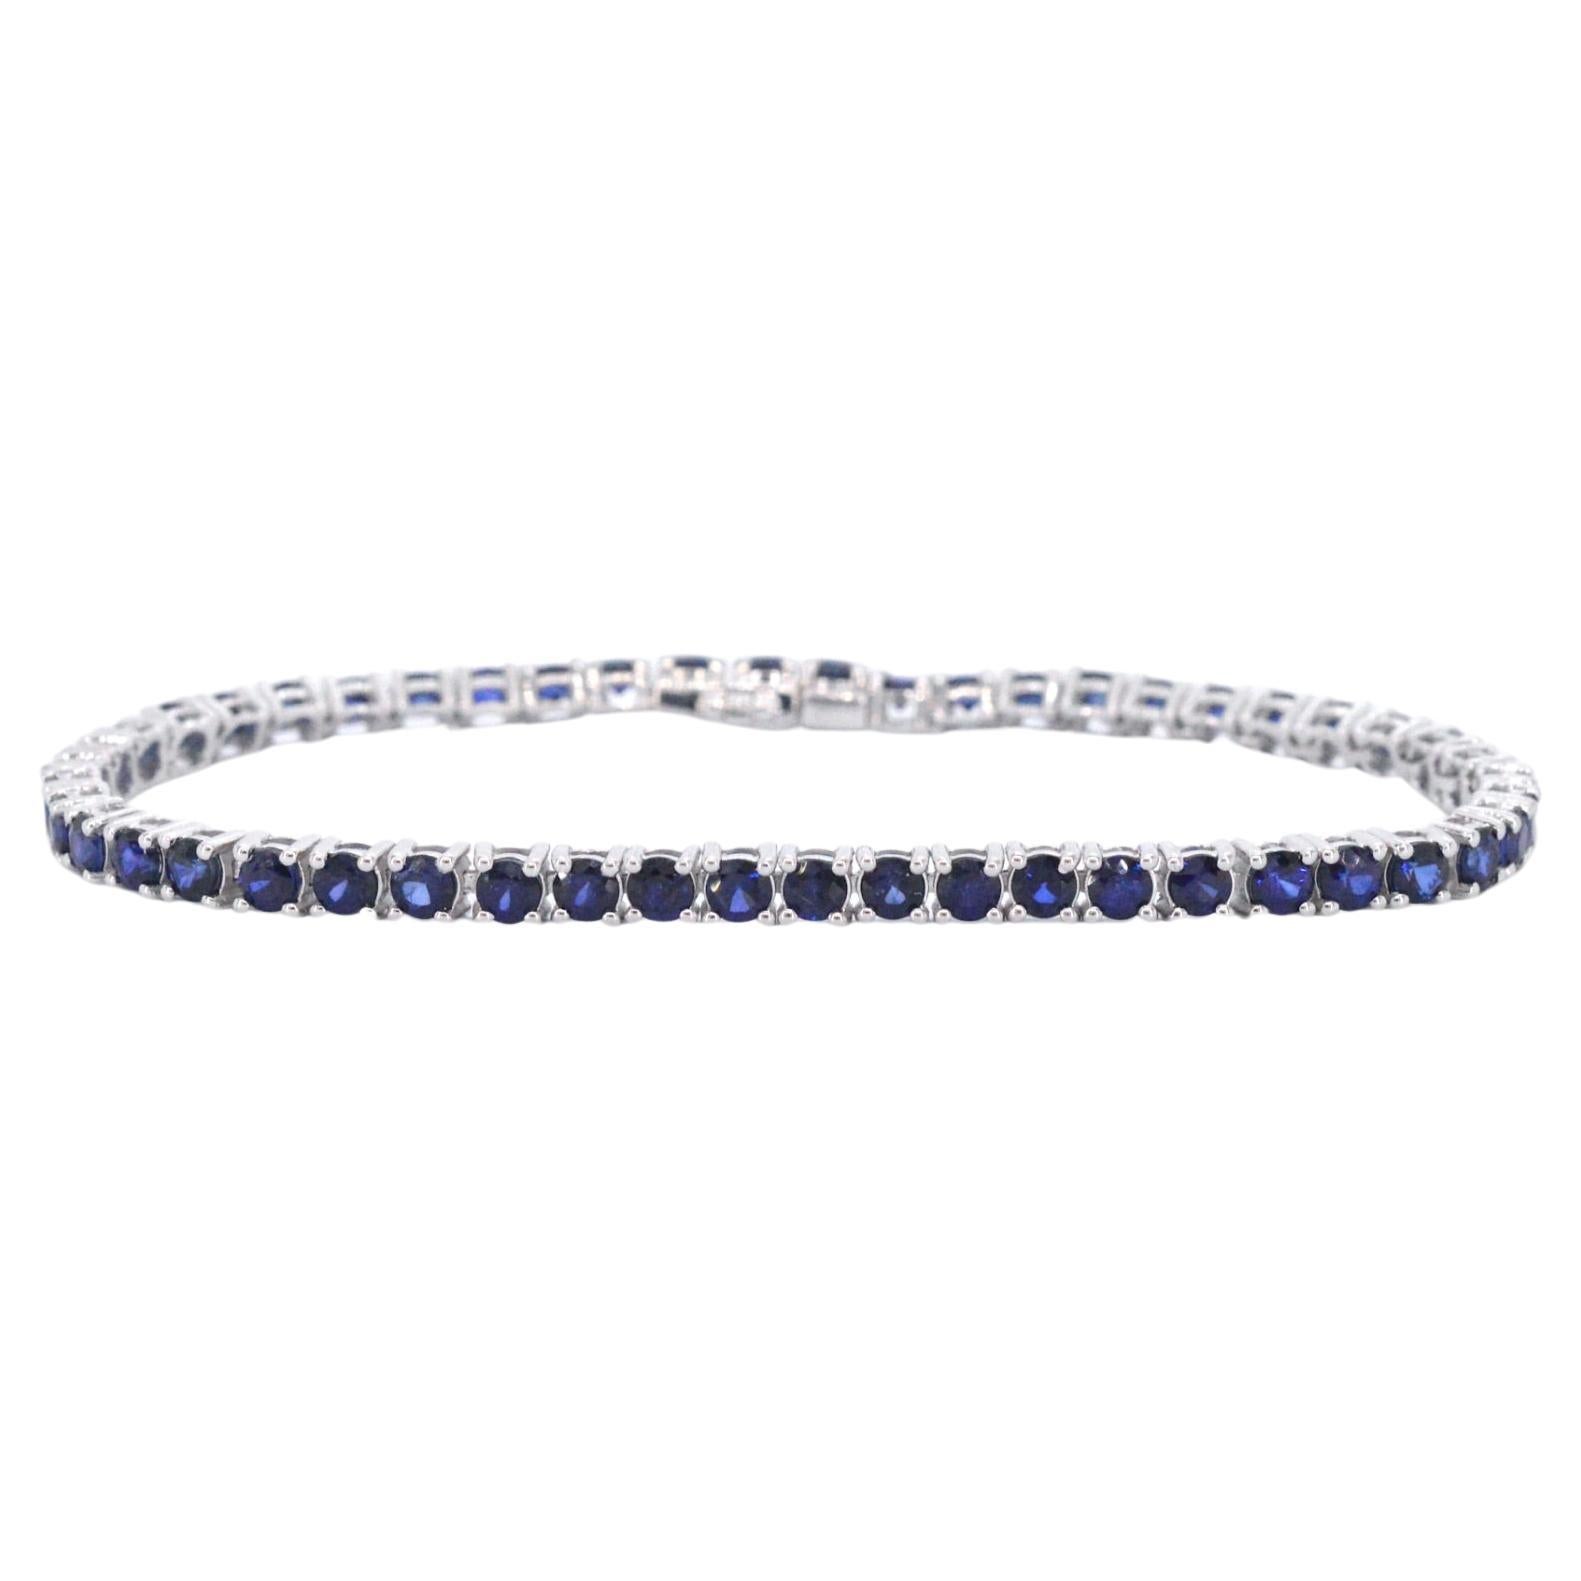 White Gold Tennis Bracelet with Sapphires